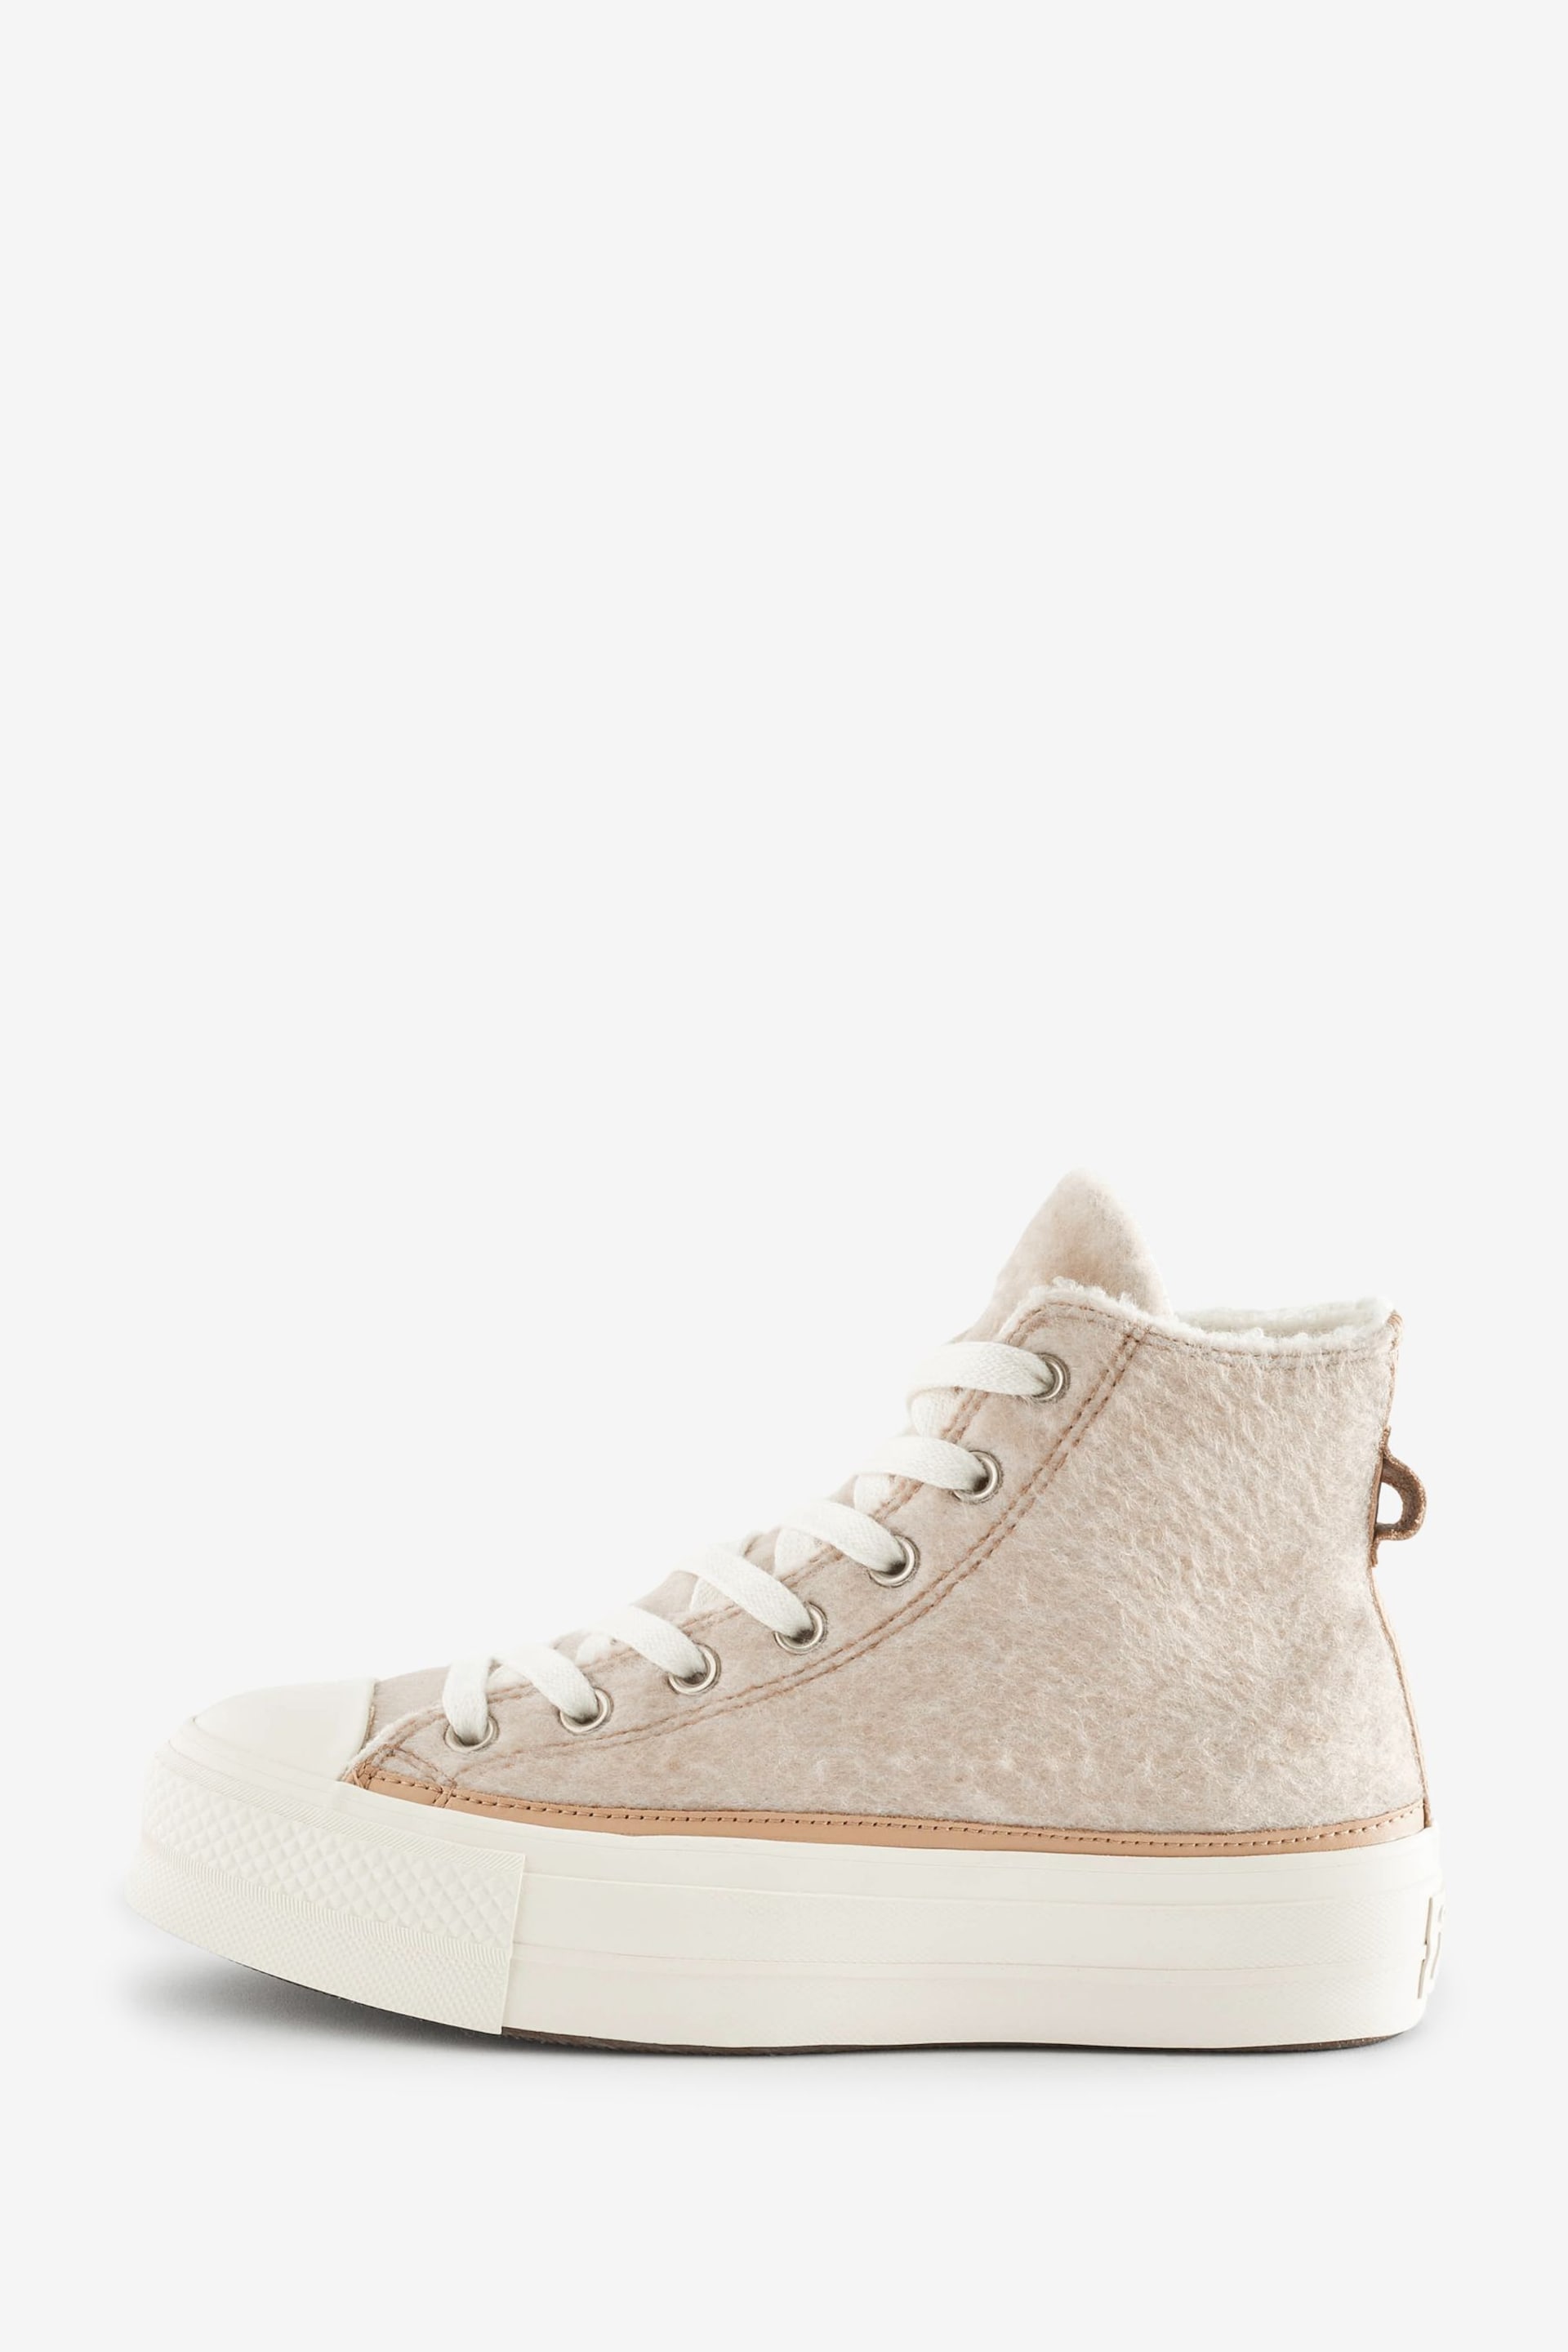 Converse Neutral Fleece Lined Chuck Taylor All Star Lift Trainers - Image 2 of 9